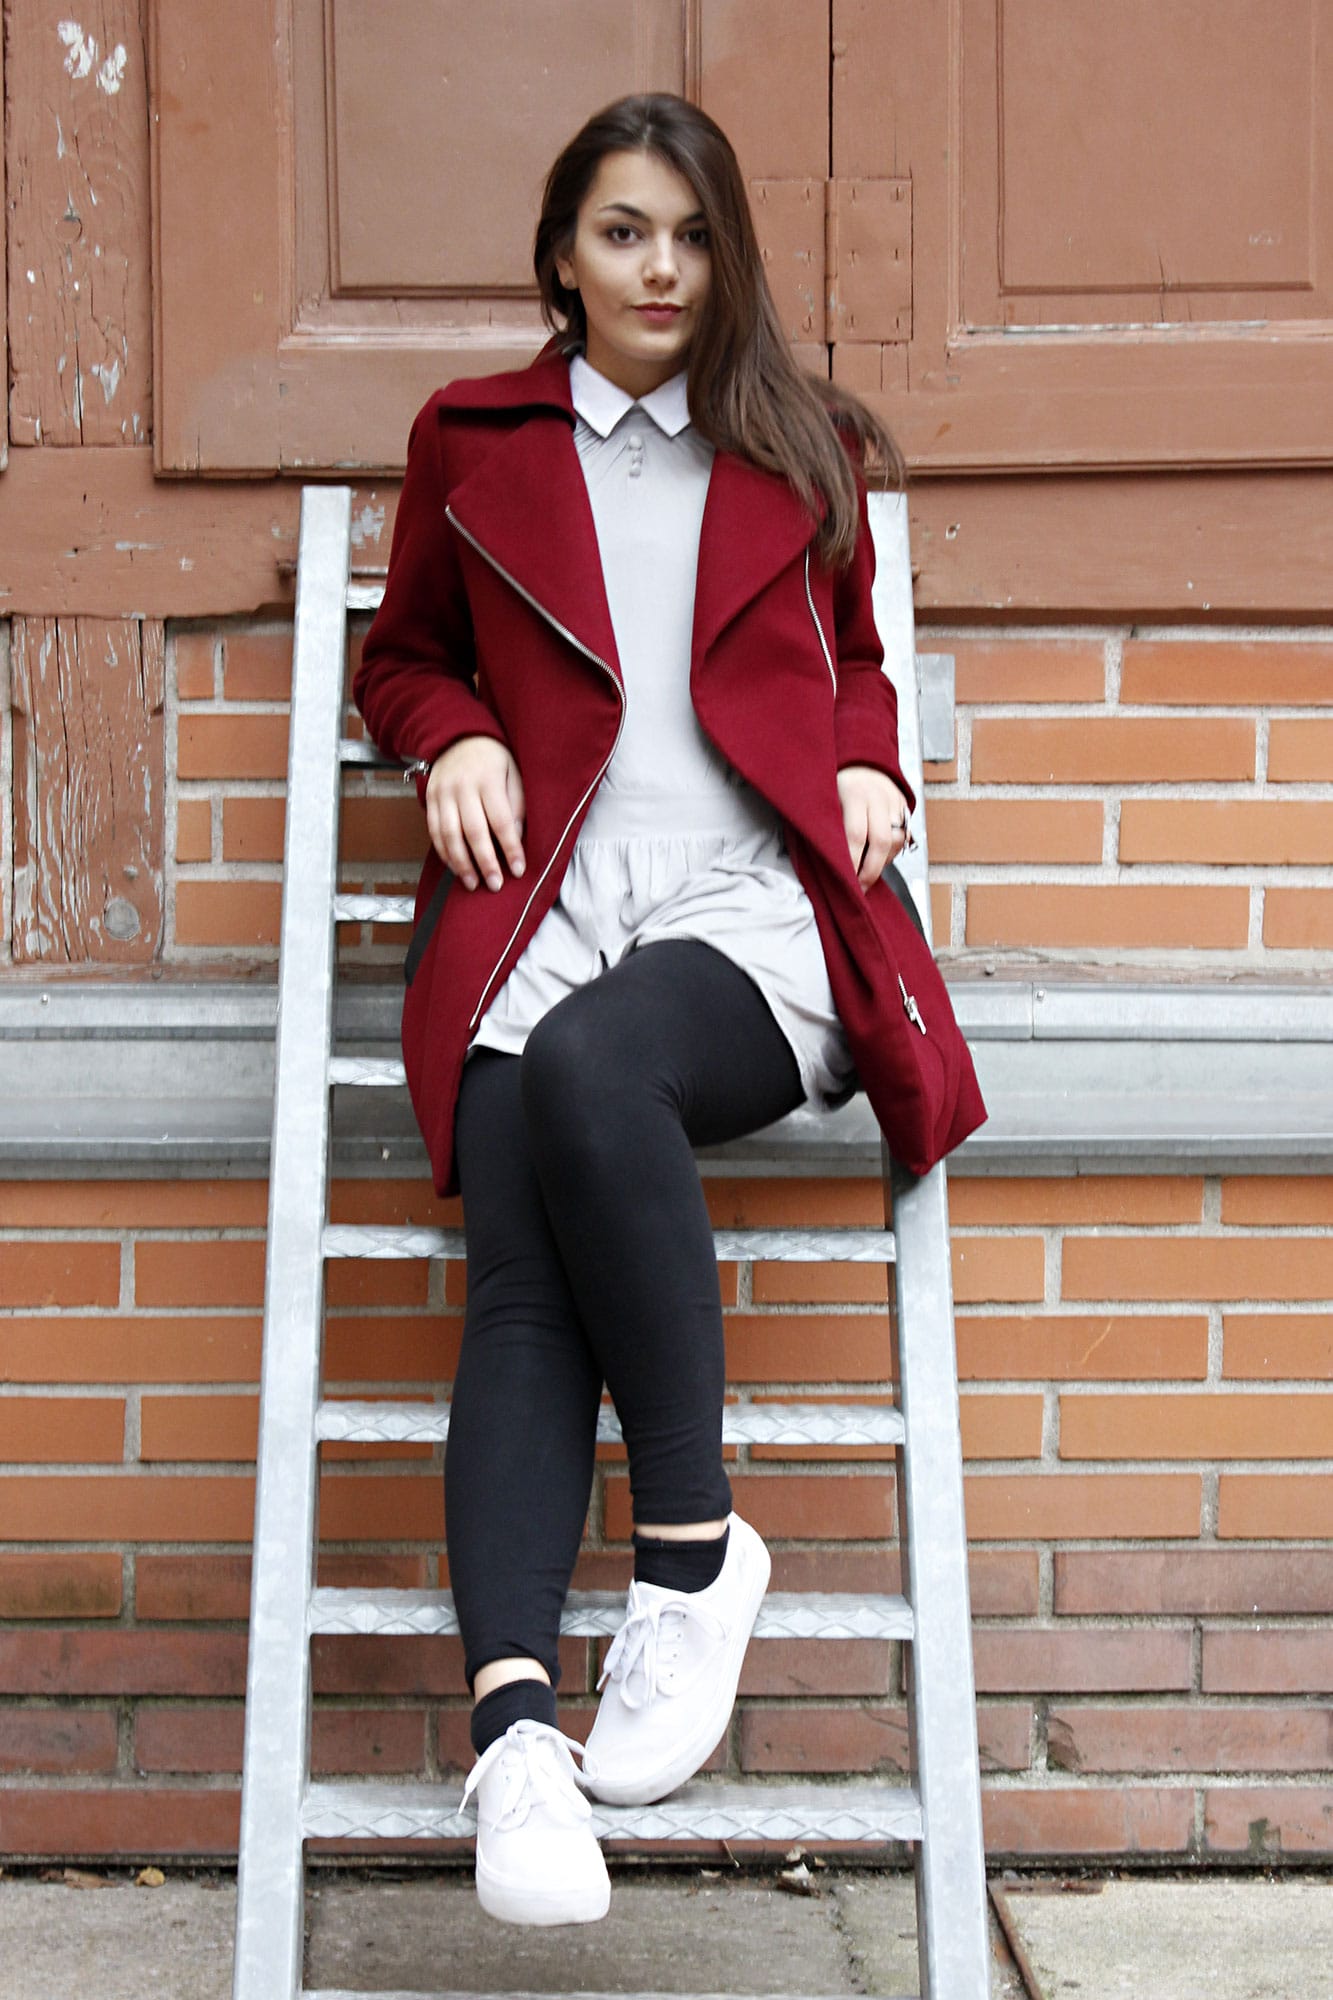 Dorie is sitting on a ladder, wearing a red coat, black legging, a grey dress and white shoes 